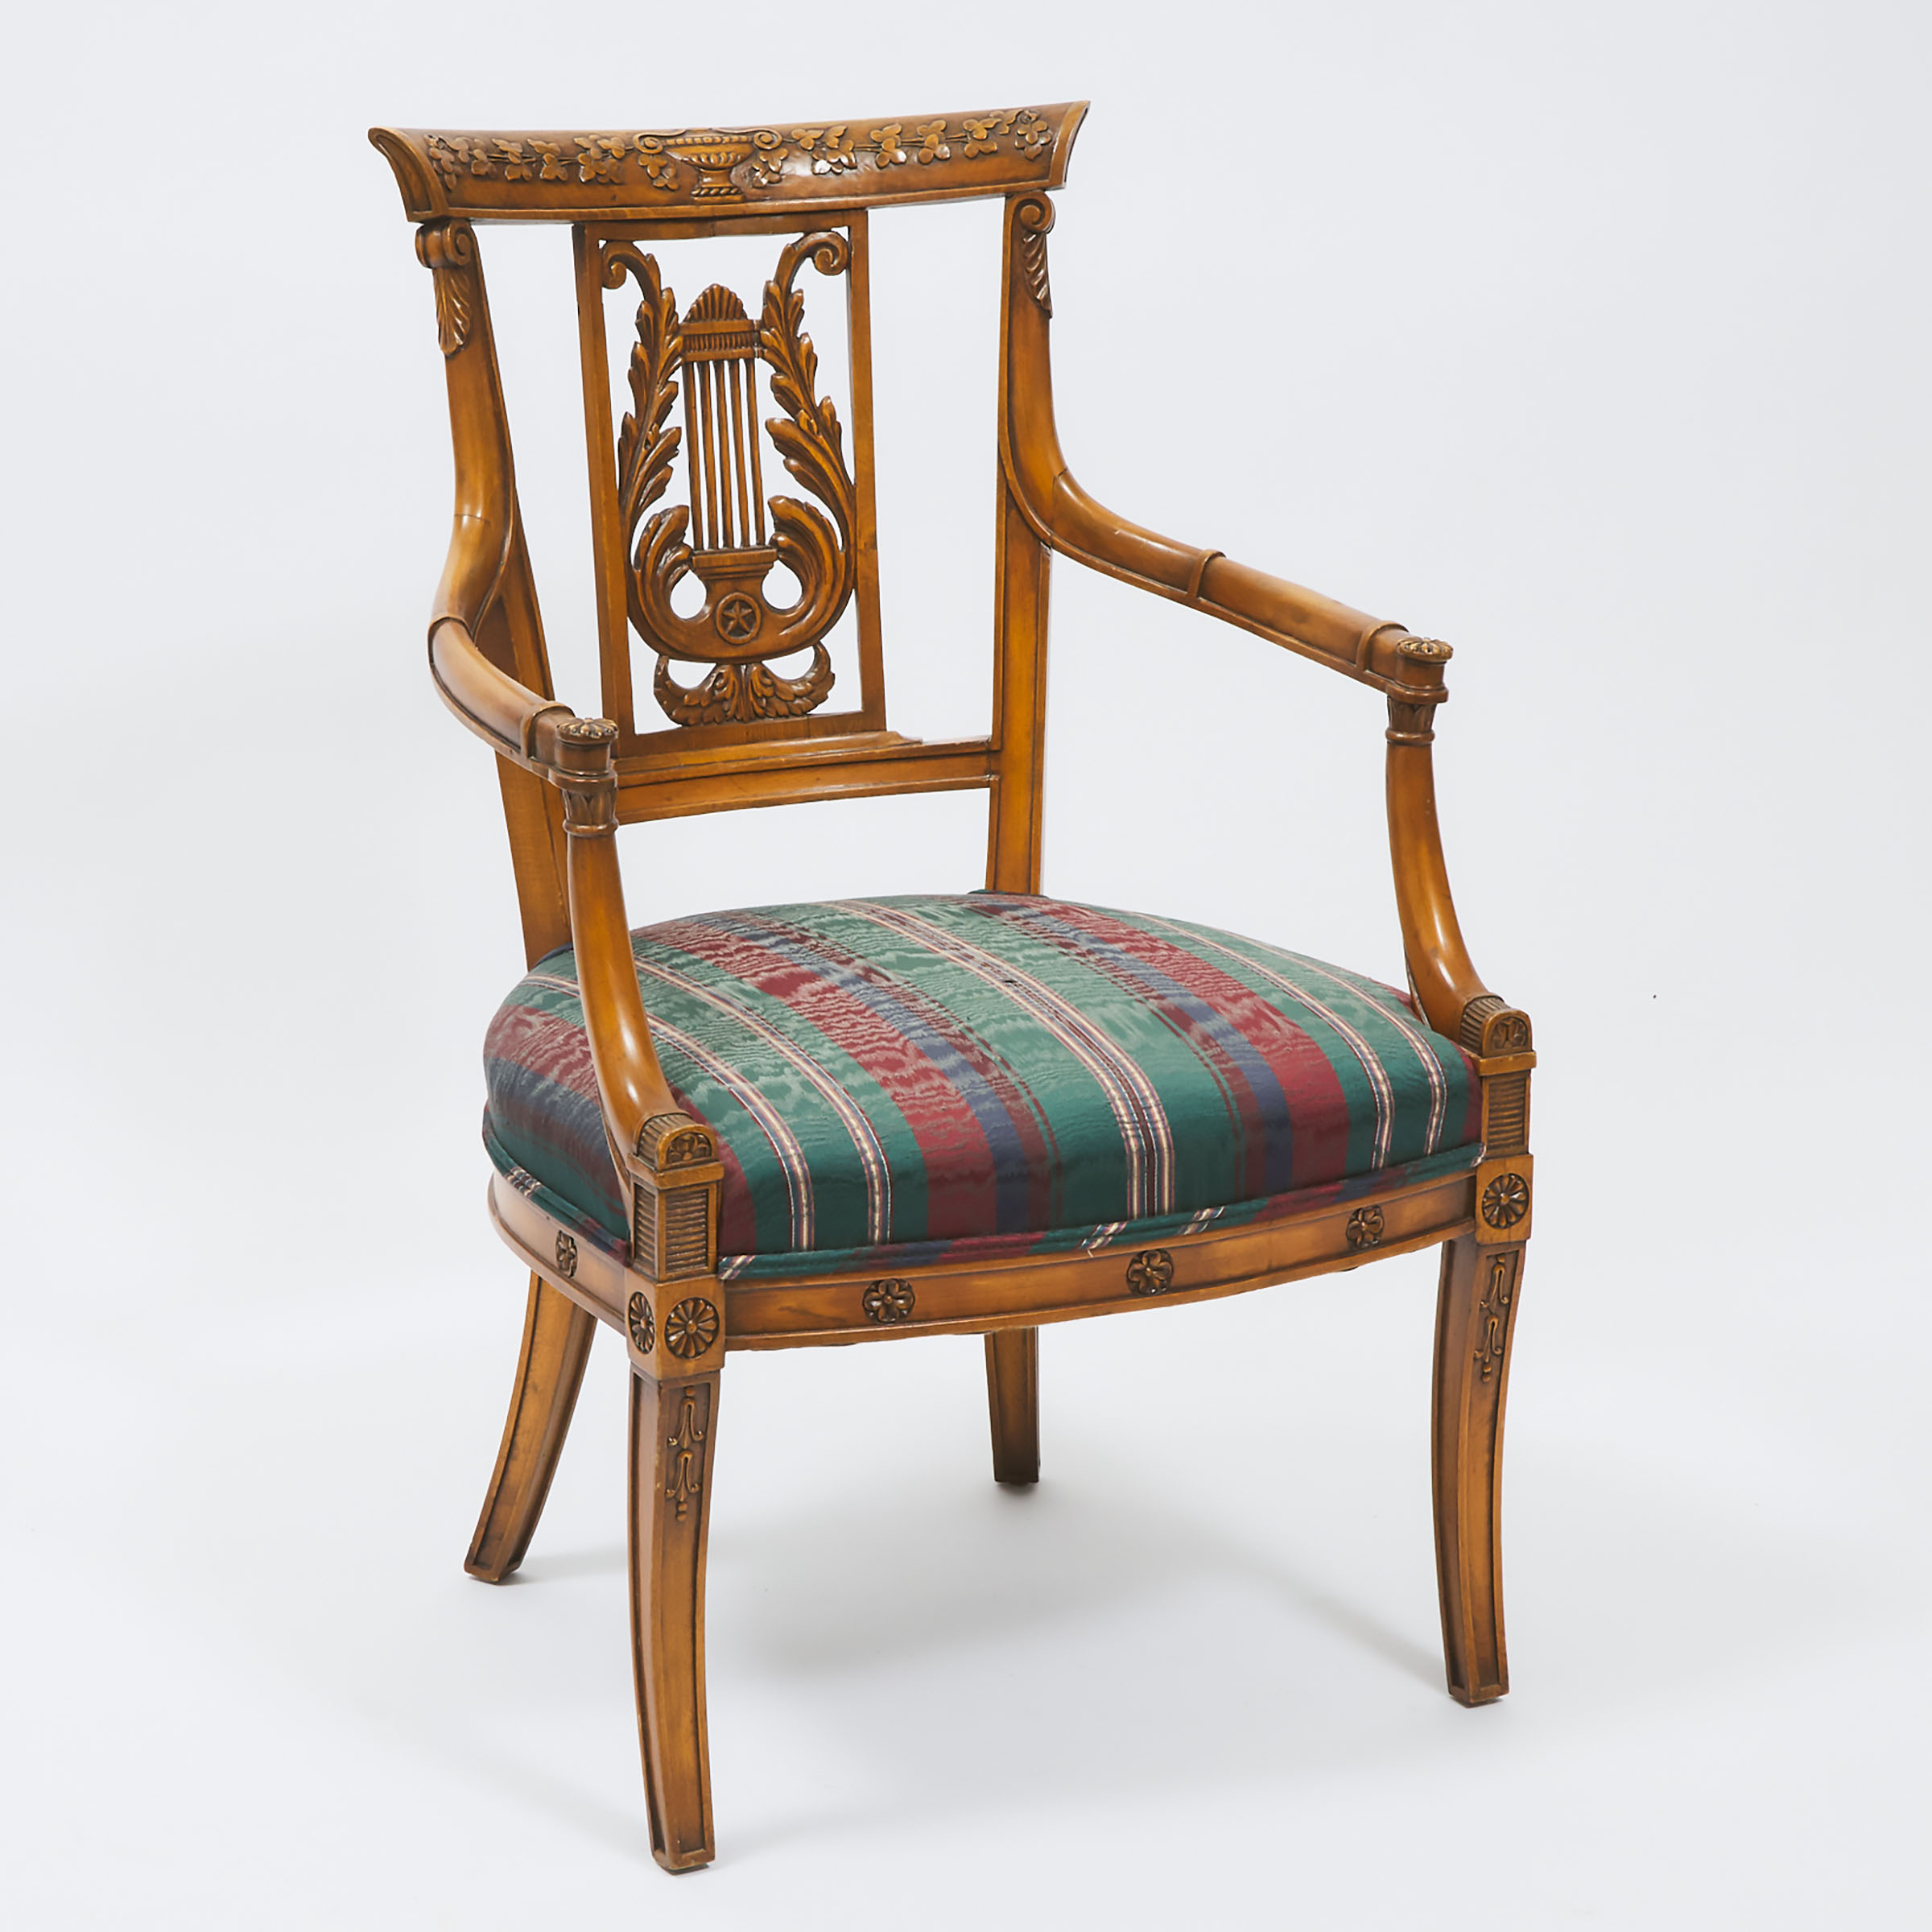 Carved Neoclassical Open Armchair, early 20th century